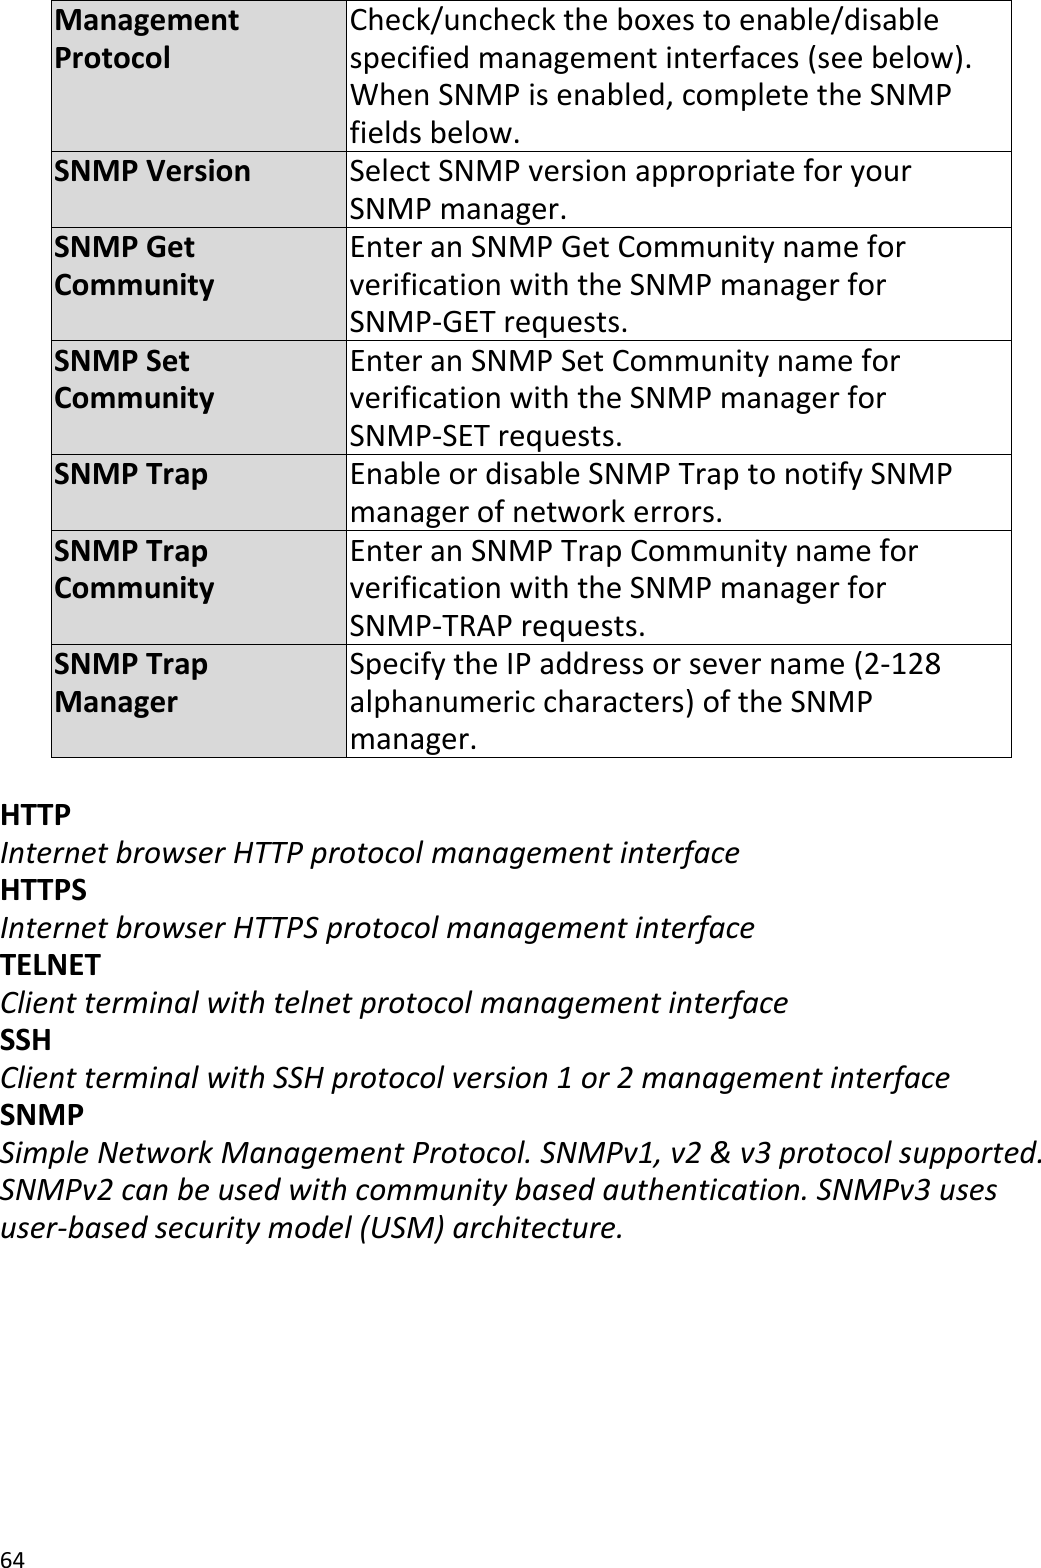 64  Management Protocol Check/uncheck the boxes to enable/disable specified management interfaces (see below). When SNMP is enabled, complete the SNMP fields below. SNMP Version Select SNMP version appropriate for your SNMP manager. SNMP Get Community Enter an SNMP Get Community name for verification with the SNMP manager for SNMP-GET requests. SNMP Set Community Enter an SNMP Set Community name for verification with the SNMP manager for SNMP-SET requests. SNMP Trap Enable or disable SNMP Trap to notify SNMP manager of network errors. SNMP Trap Community Enter an SNMP Trap Community name for verification with the SNMP manager for SNMP-TRAP requests. SNMP Trap Manager Specify the IP address or sever name (2-128 alphanumeric characters) of the SNMP manager.  HTTP Internet browser HTTP protocol management interface HTTPS Internet browser HTTPS protocol management interface TELNET Client terminal with telnet protocol management interface SSH Client terminal with SSH protocol version 1 or 2 management interface SNMP Simple Network Management Protocol. SNMPv1, v2 &amp; v3 protocol supported. SNMPv2 can be used with community based authentication. SNMPv3 uses user-based security model (USM) architecture.  